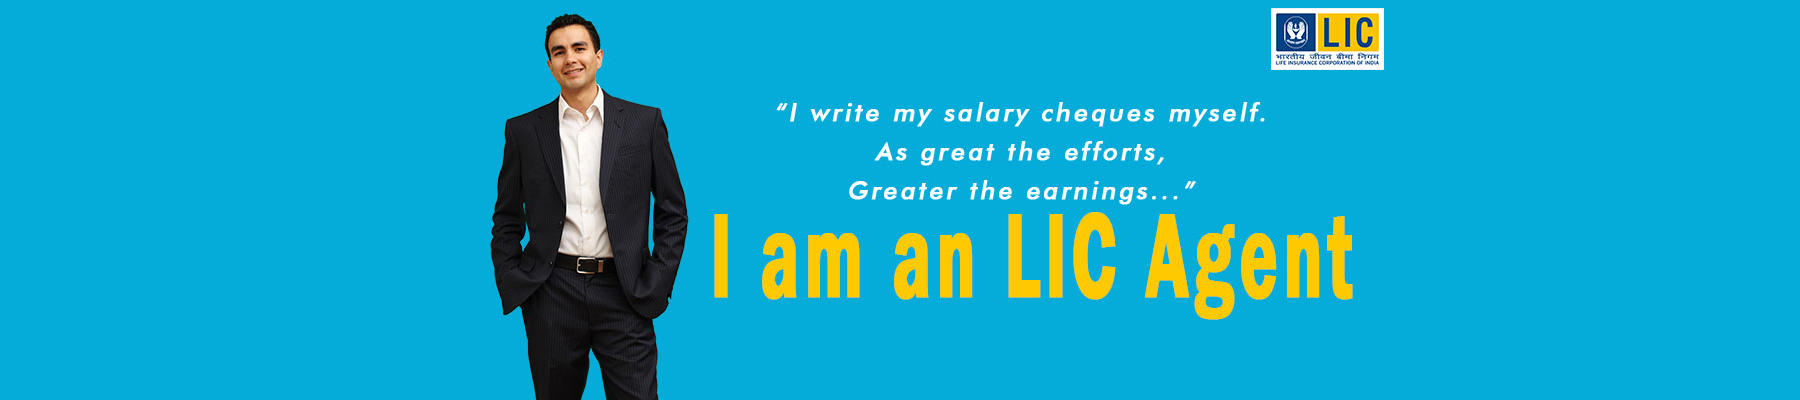 procedure to become lic agent